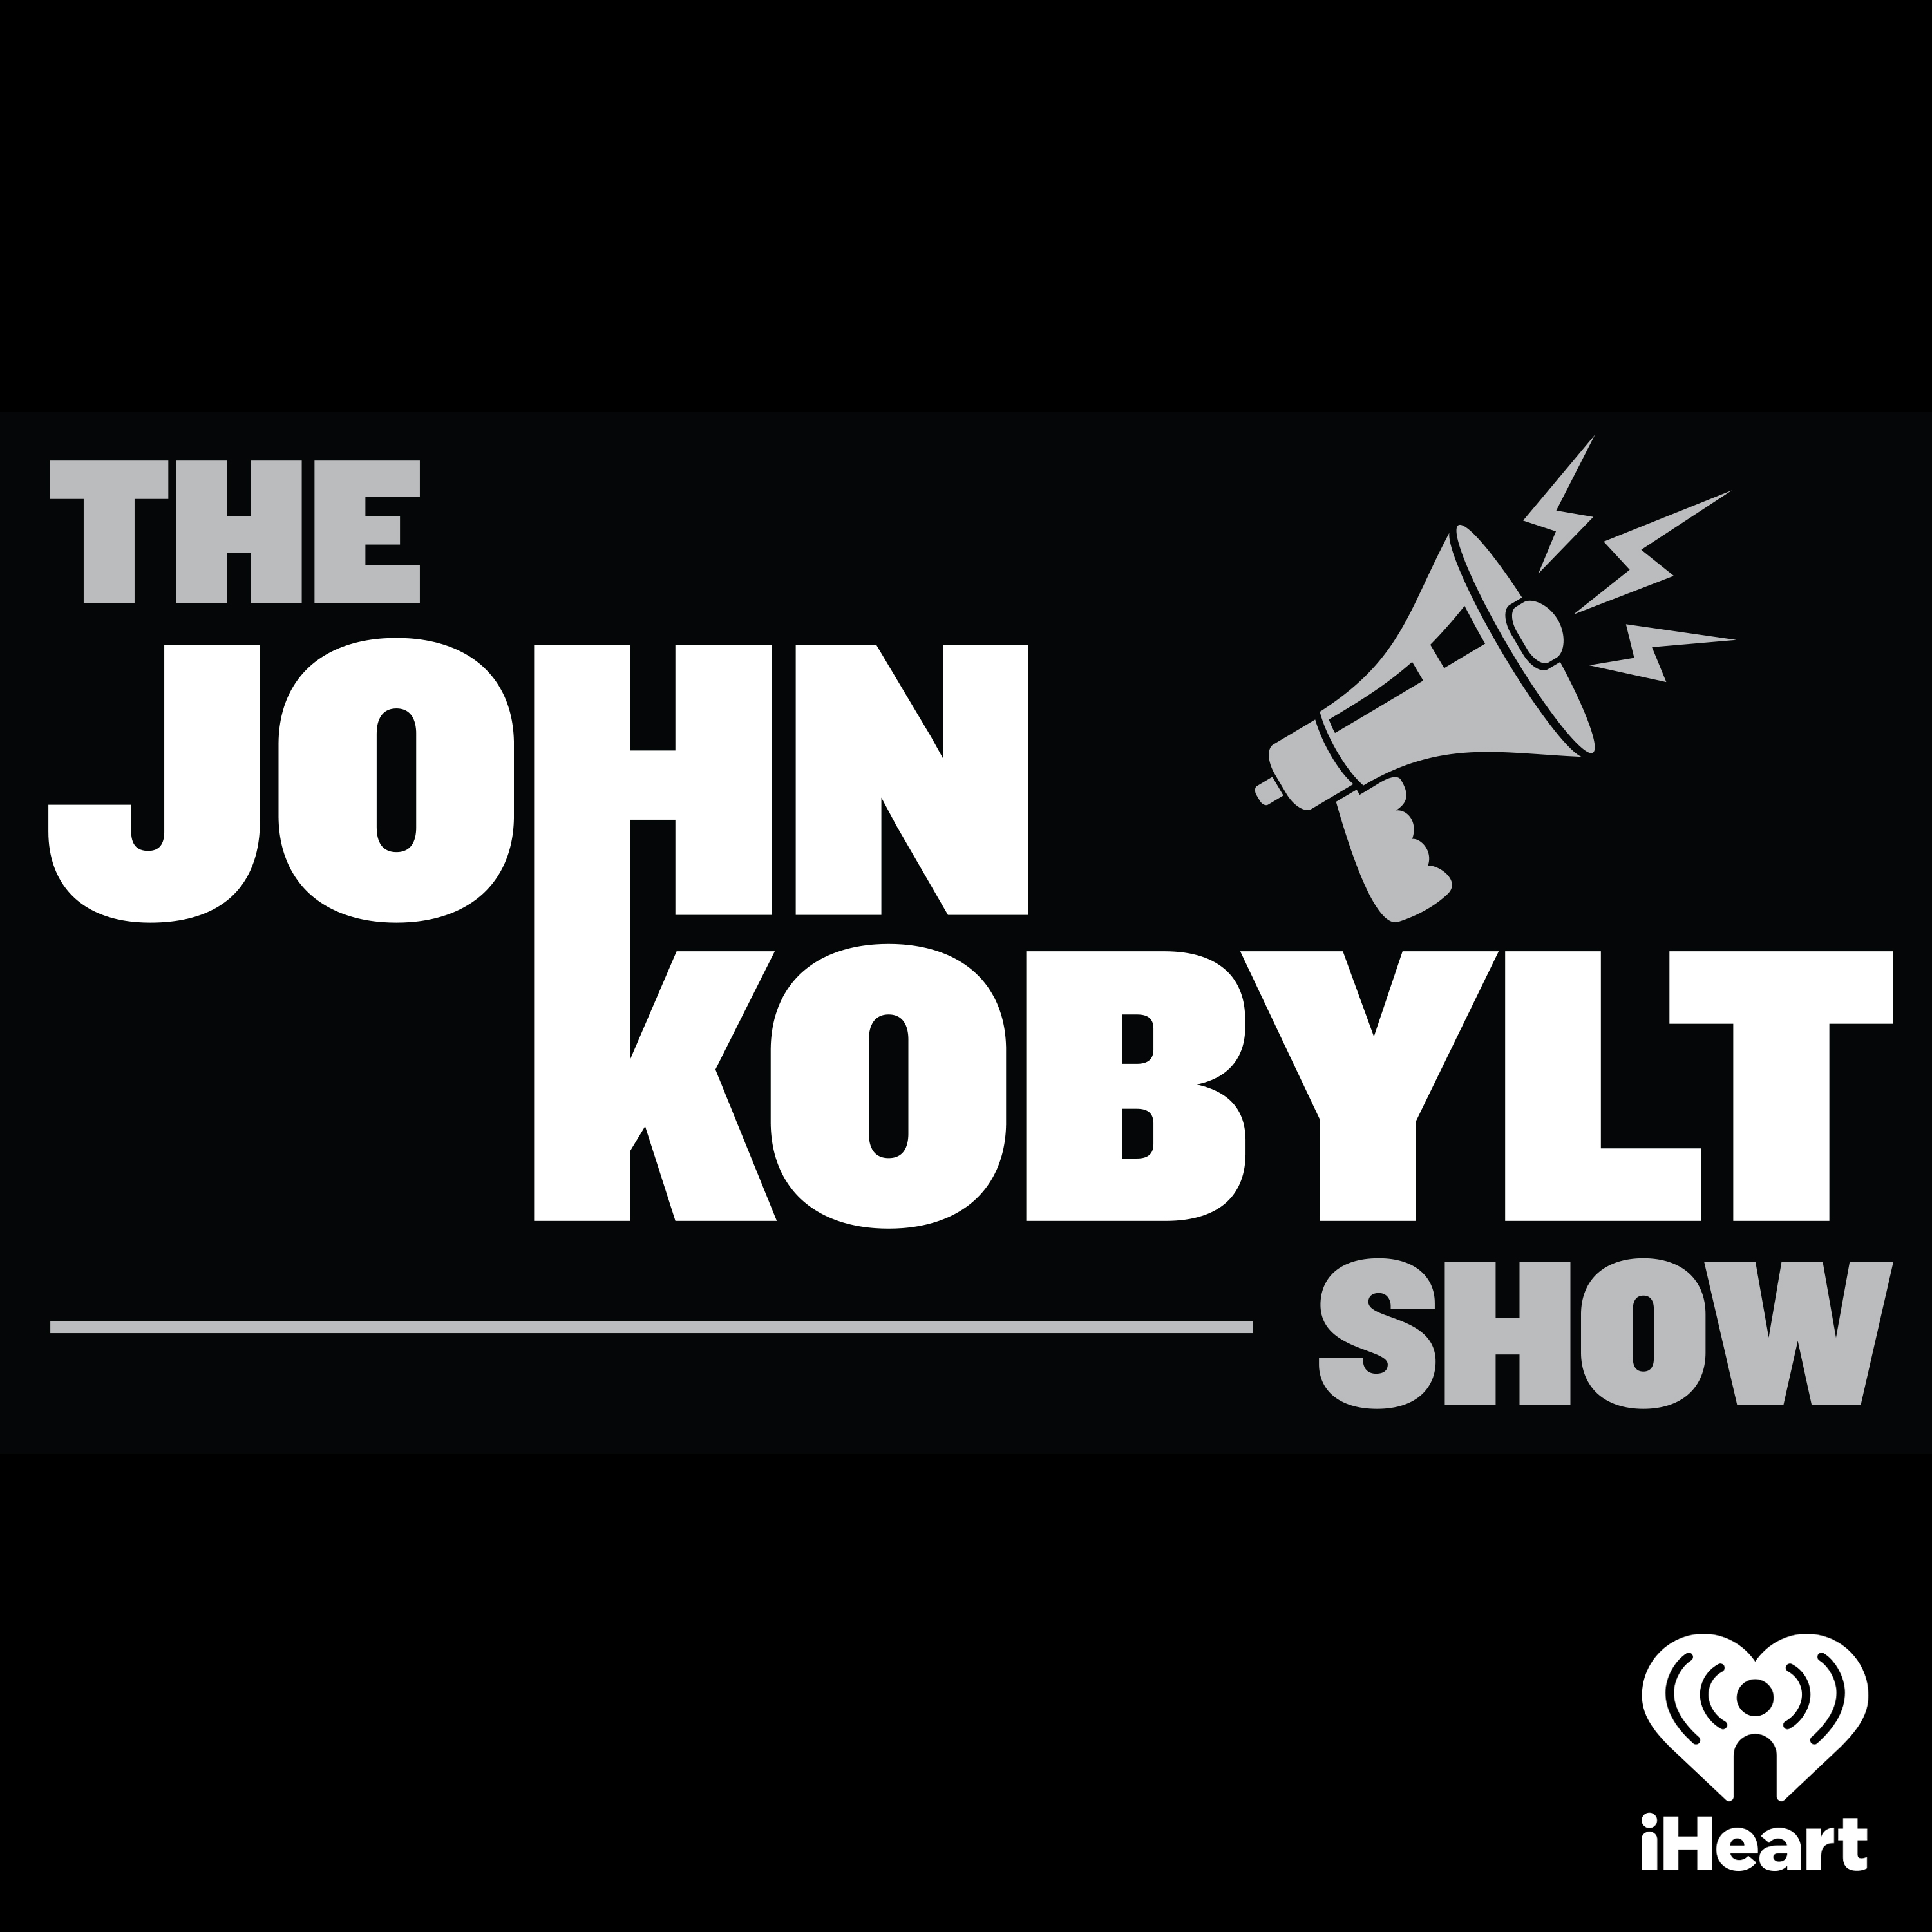 The John Kobylt Show Hour 3 (07/31) - Trump at the NABJ Convention